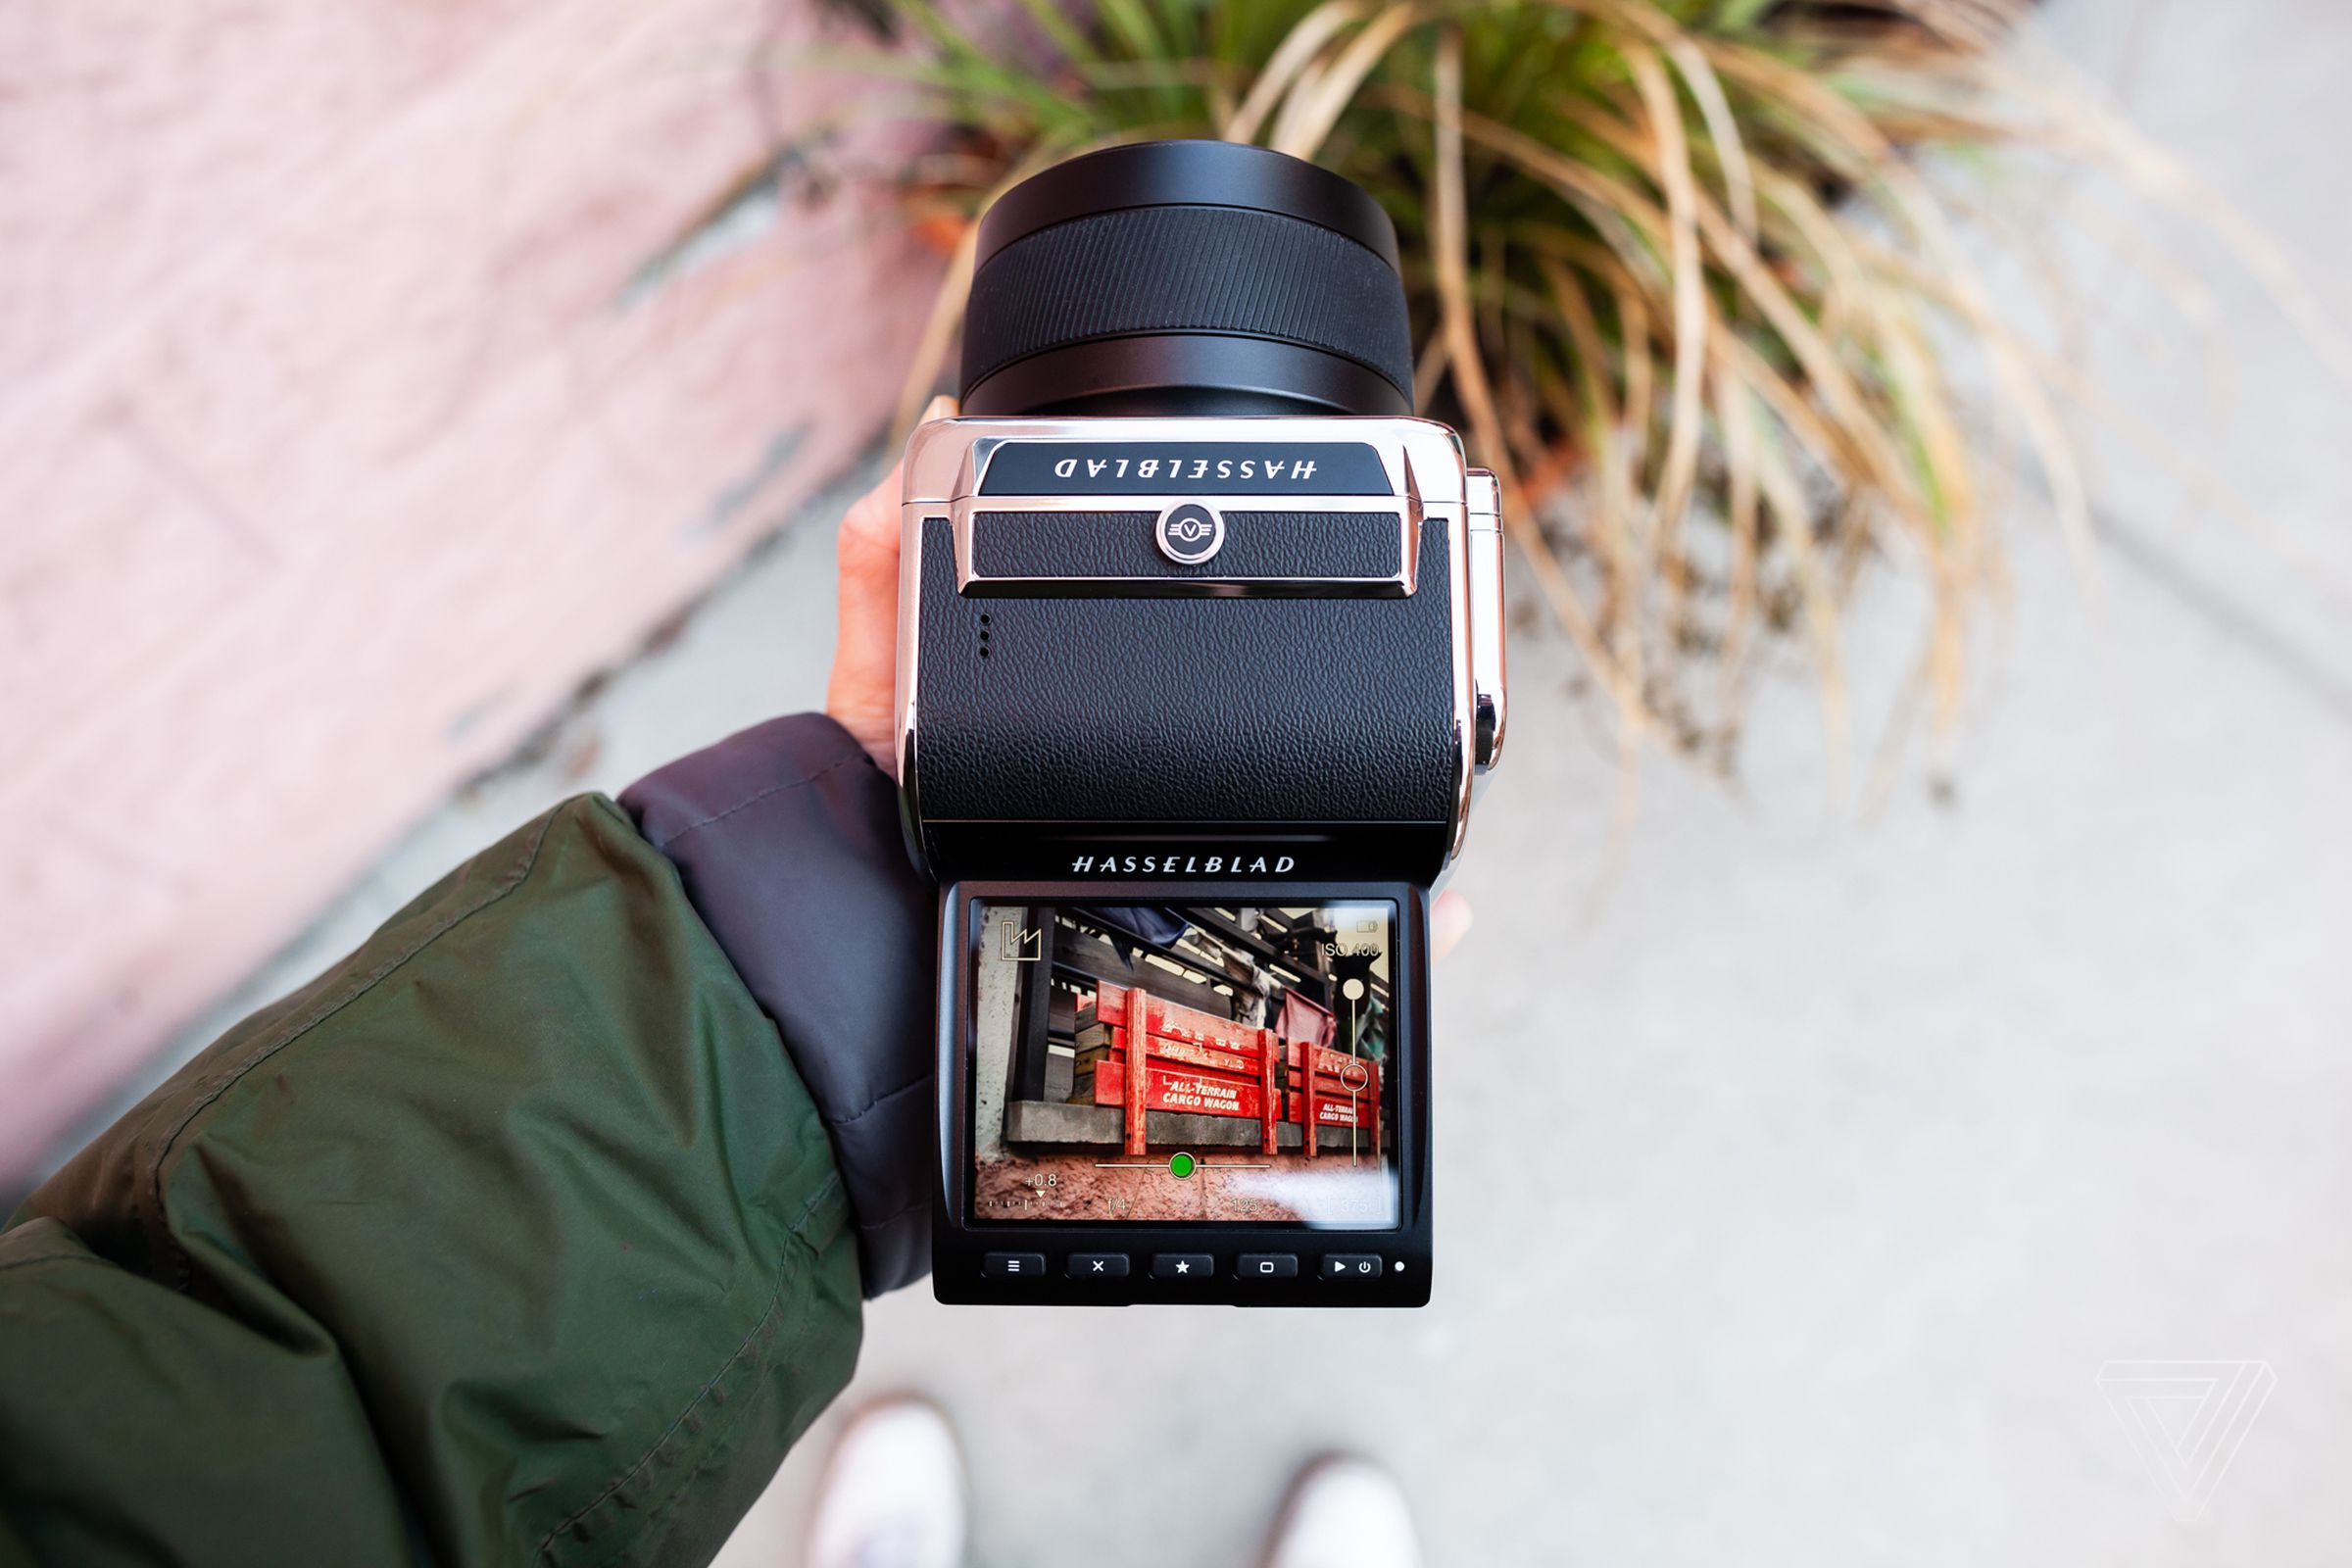 A 90-degree articulating screen allows you to look down and into the camera at your subject.